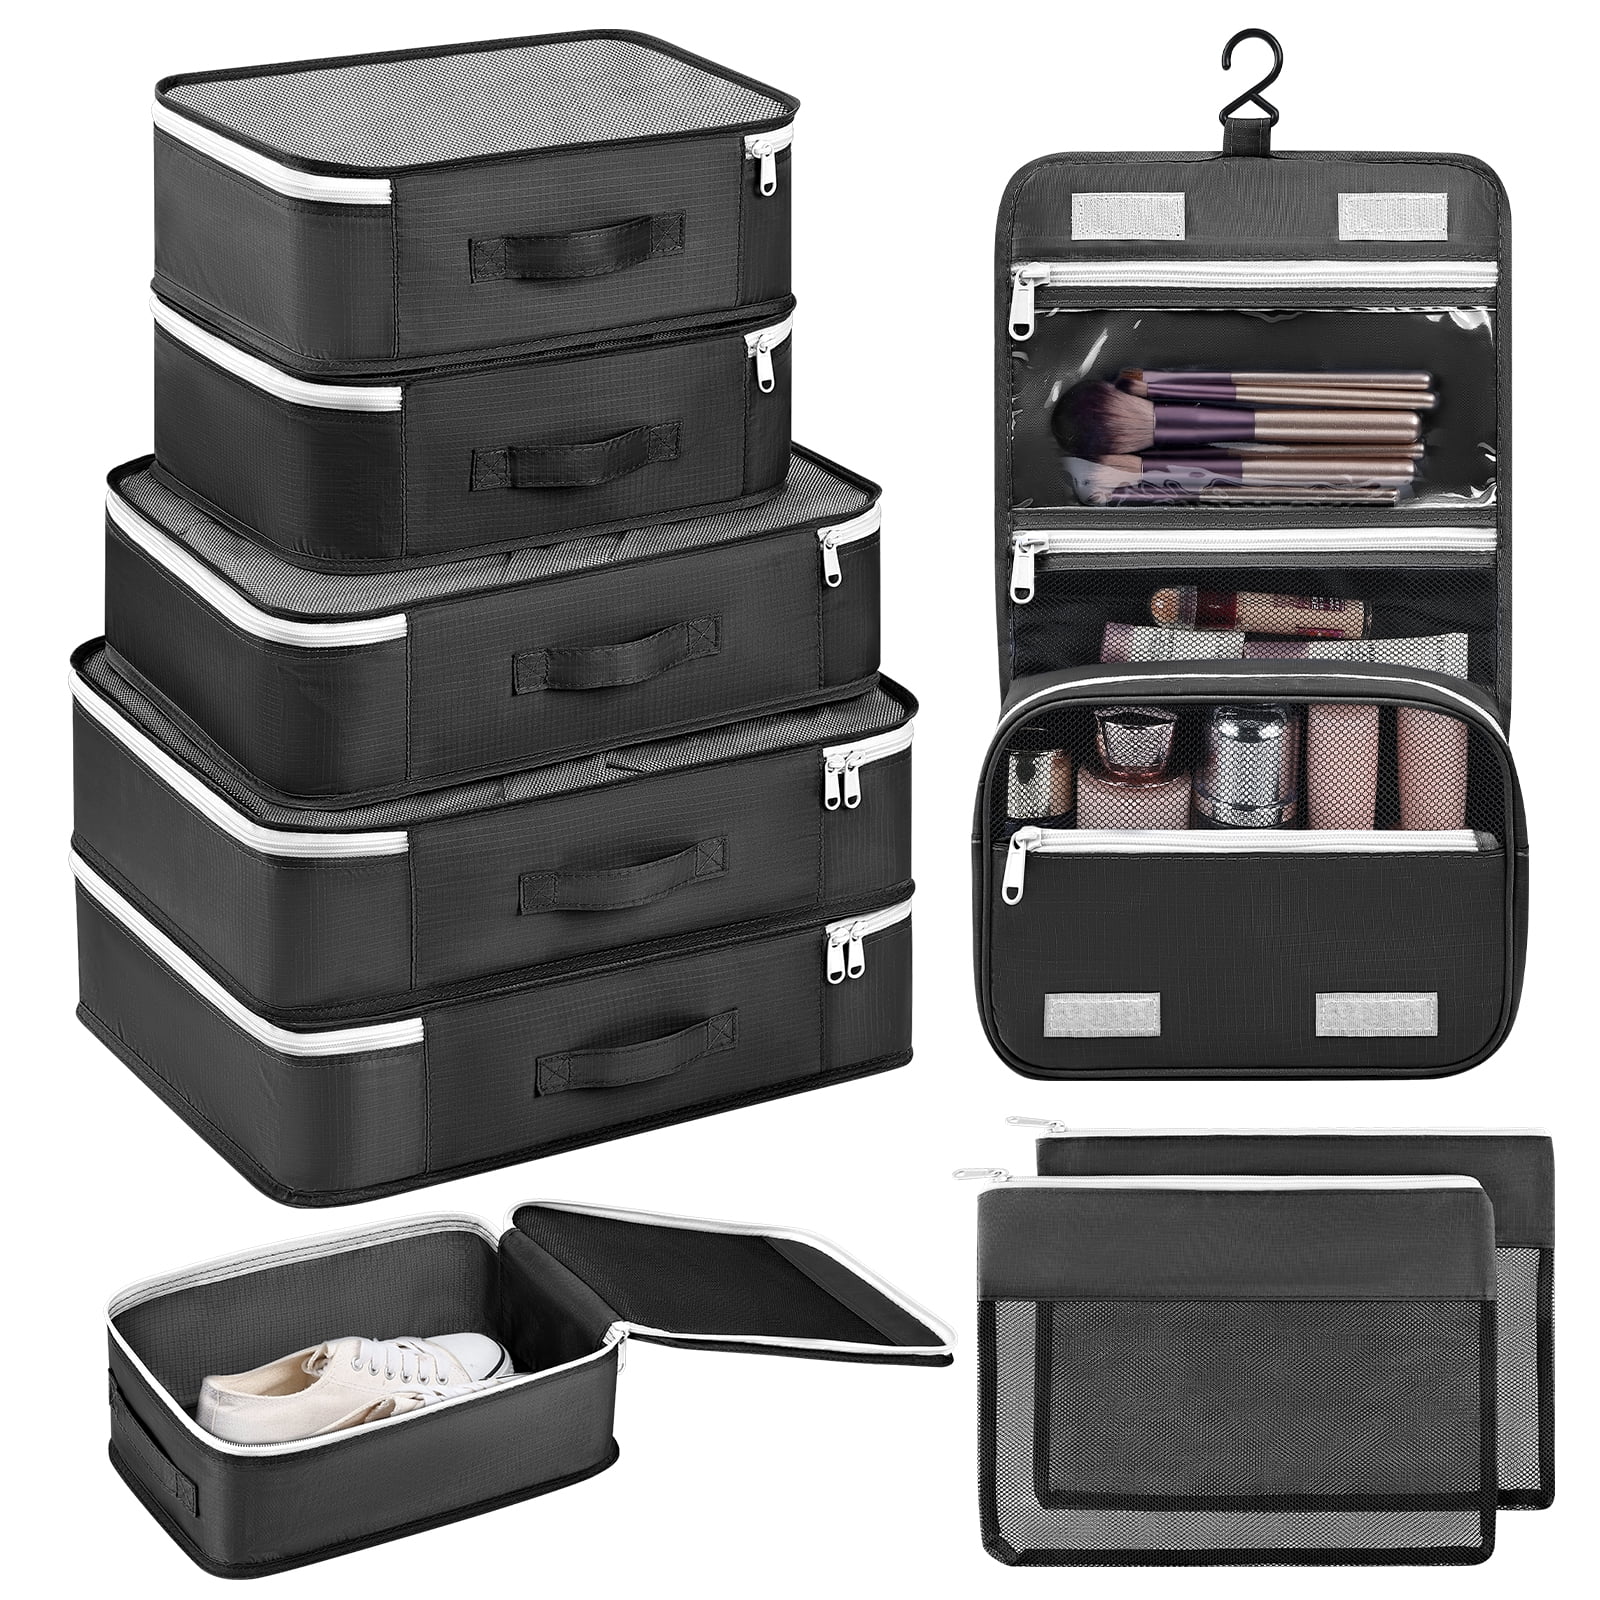 1pc Clear Travel Storage Box with Cover,Travel-Friendly Mini